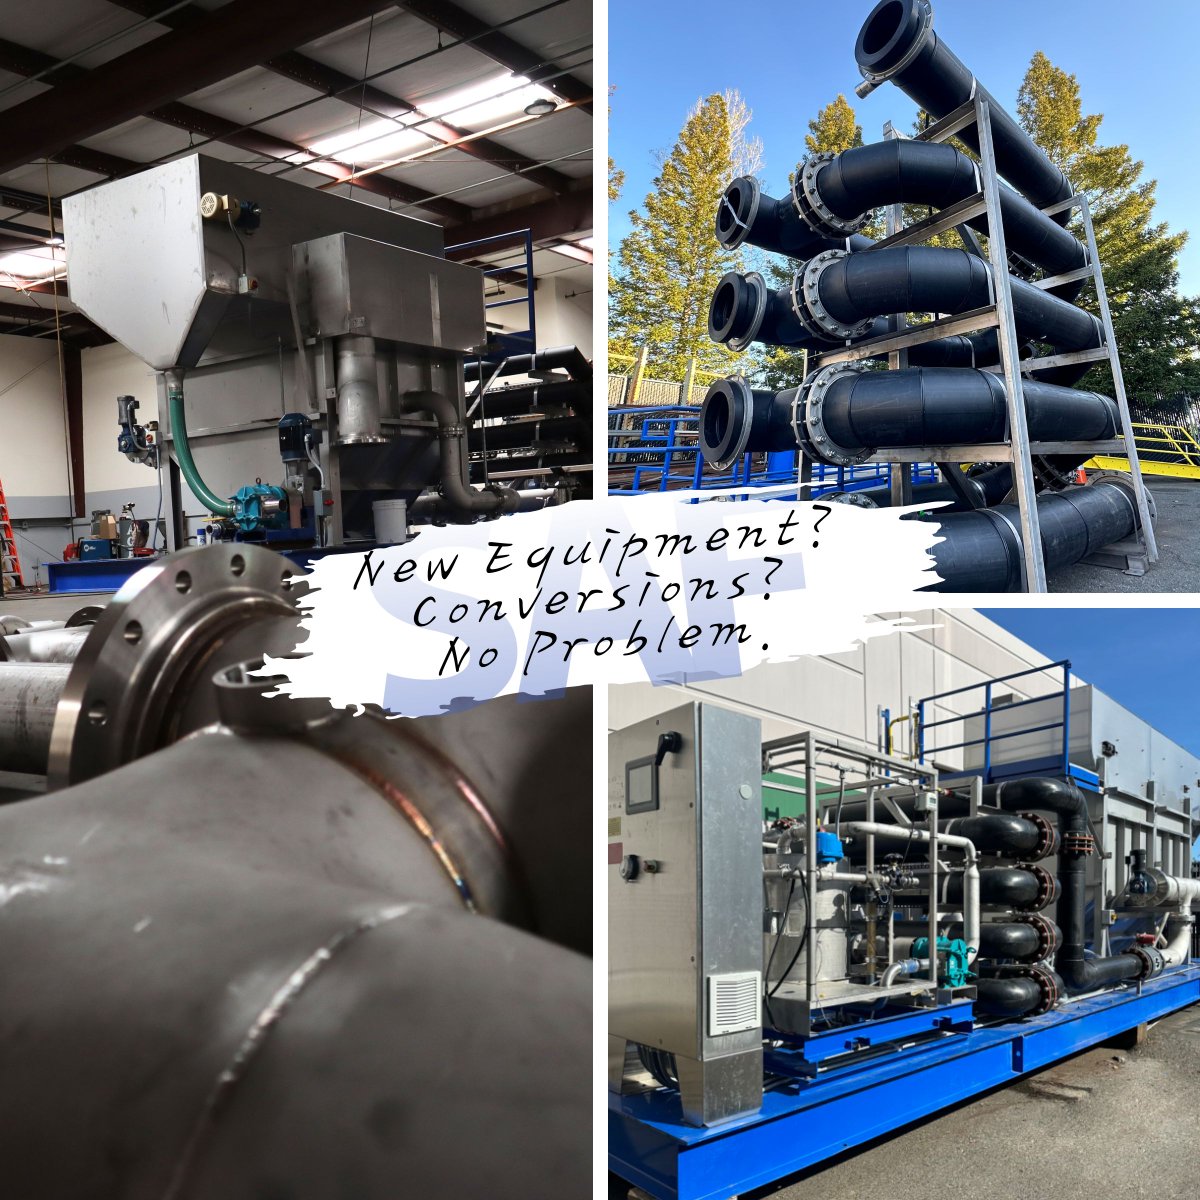 SAF® systems efficiently treat water volumes from less than 50 GPM to over 11 MGD. SAF® is your reliable, scalable, and effective treatment solution for a range of water management needs.

#water #wastewater #wastewatertreatment